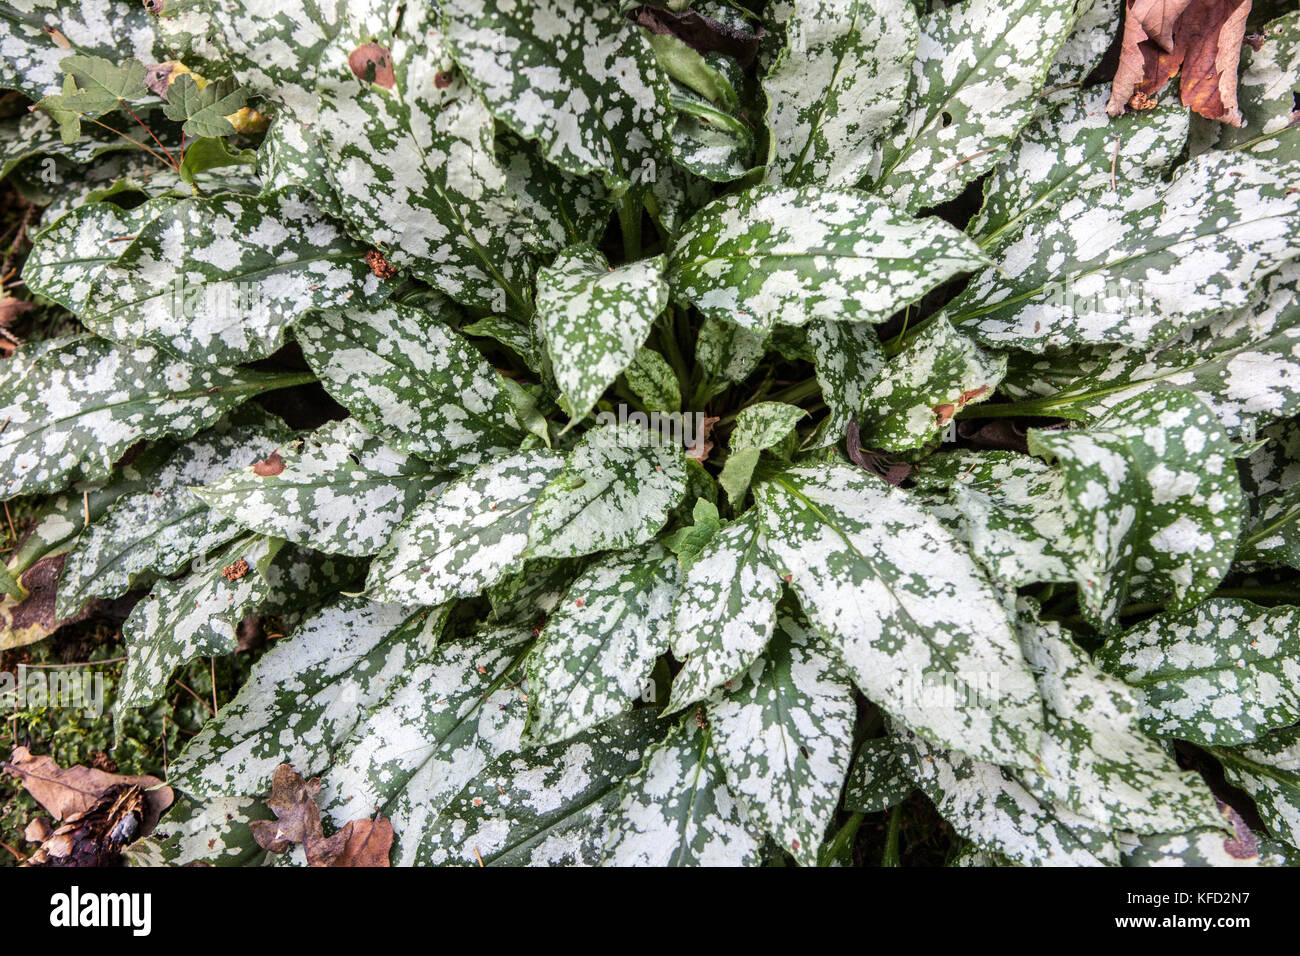 Lungwort, Pulmonaria Diana Clare with silver decorative leaves Stock Photo